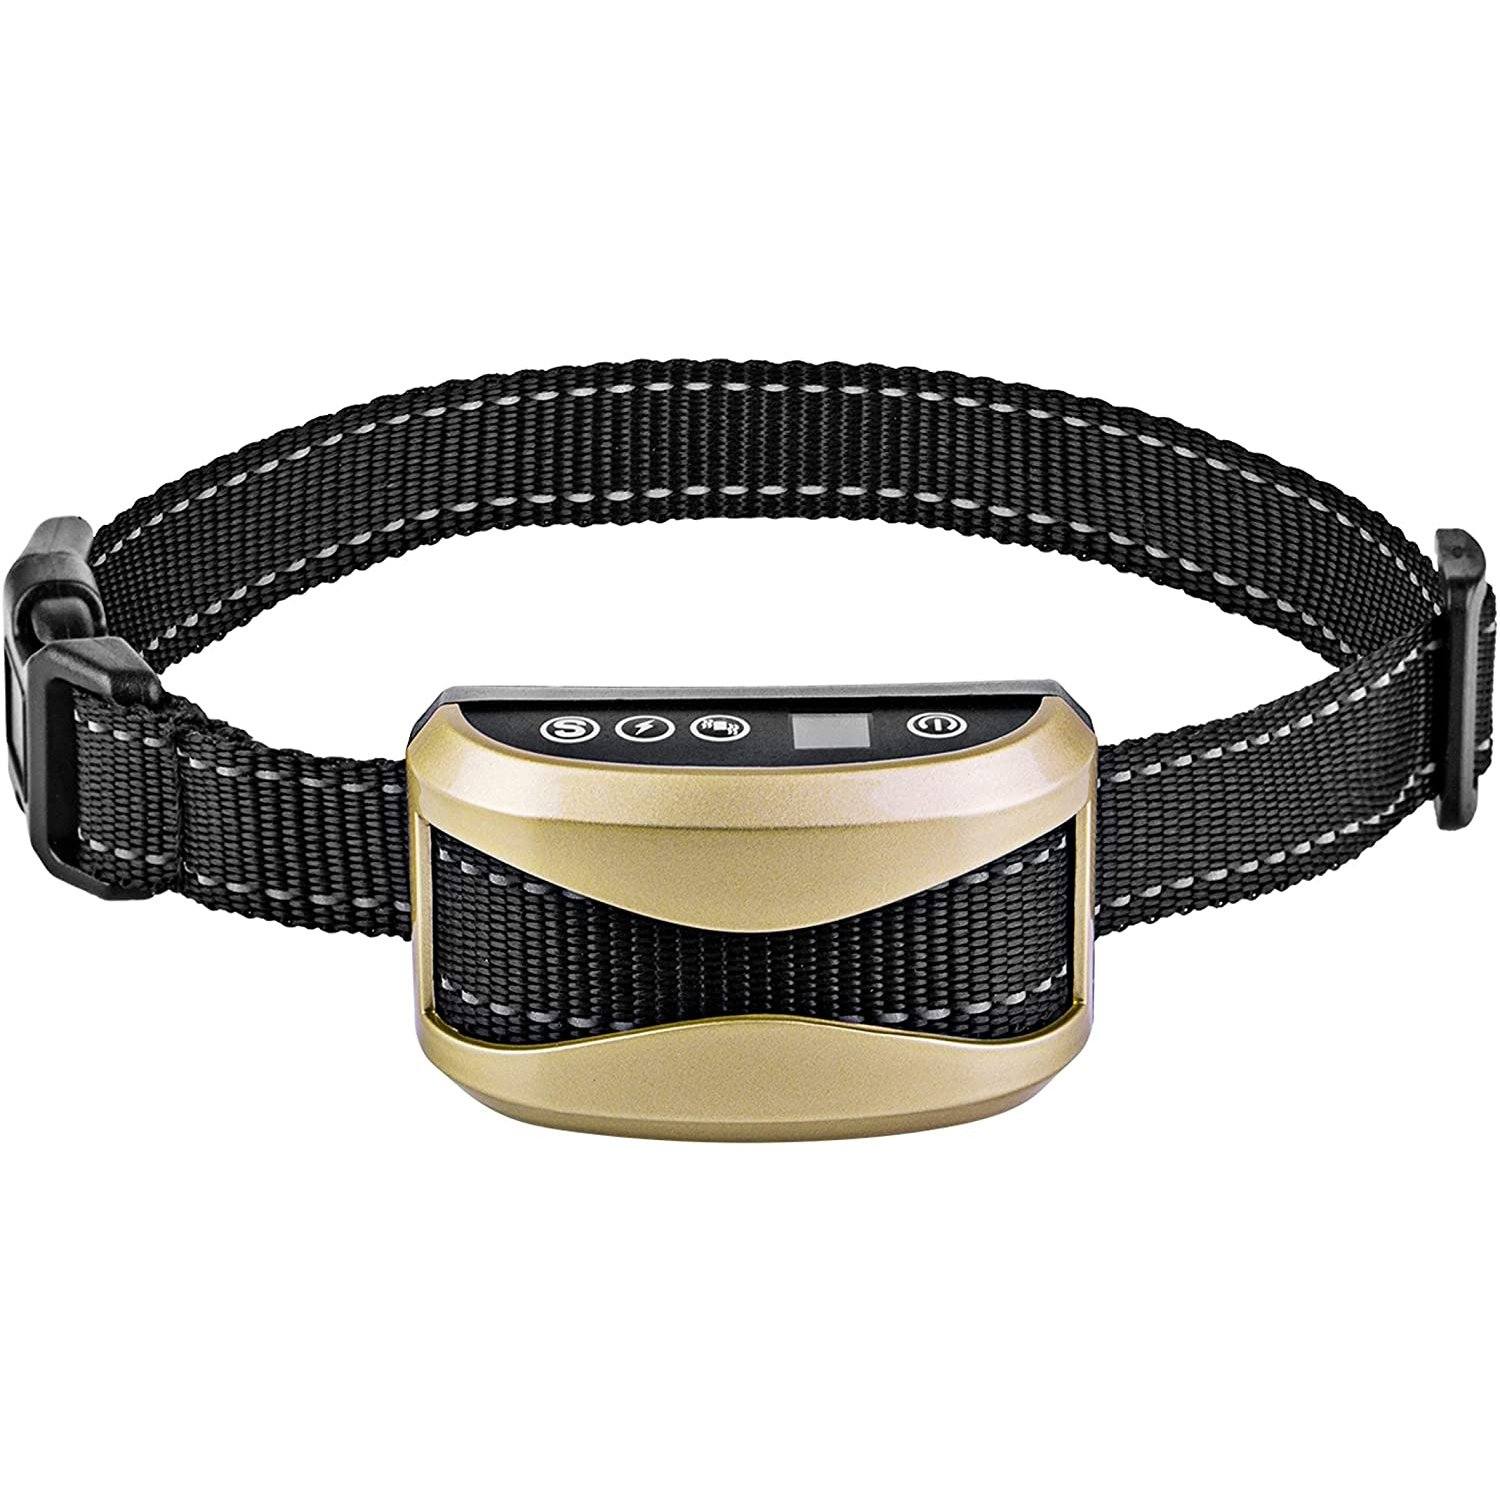 DailySale USB Rechargeable Waterproof Dog Bark Collar with Vibration and Beep